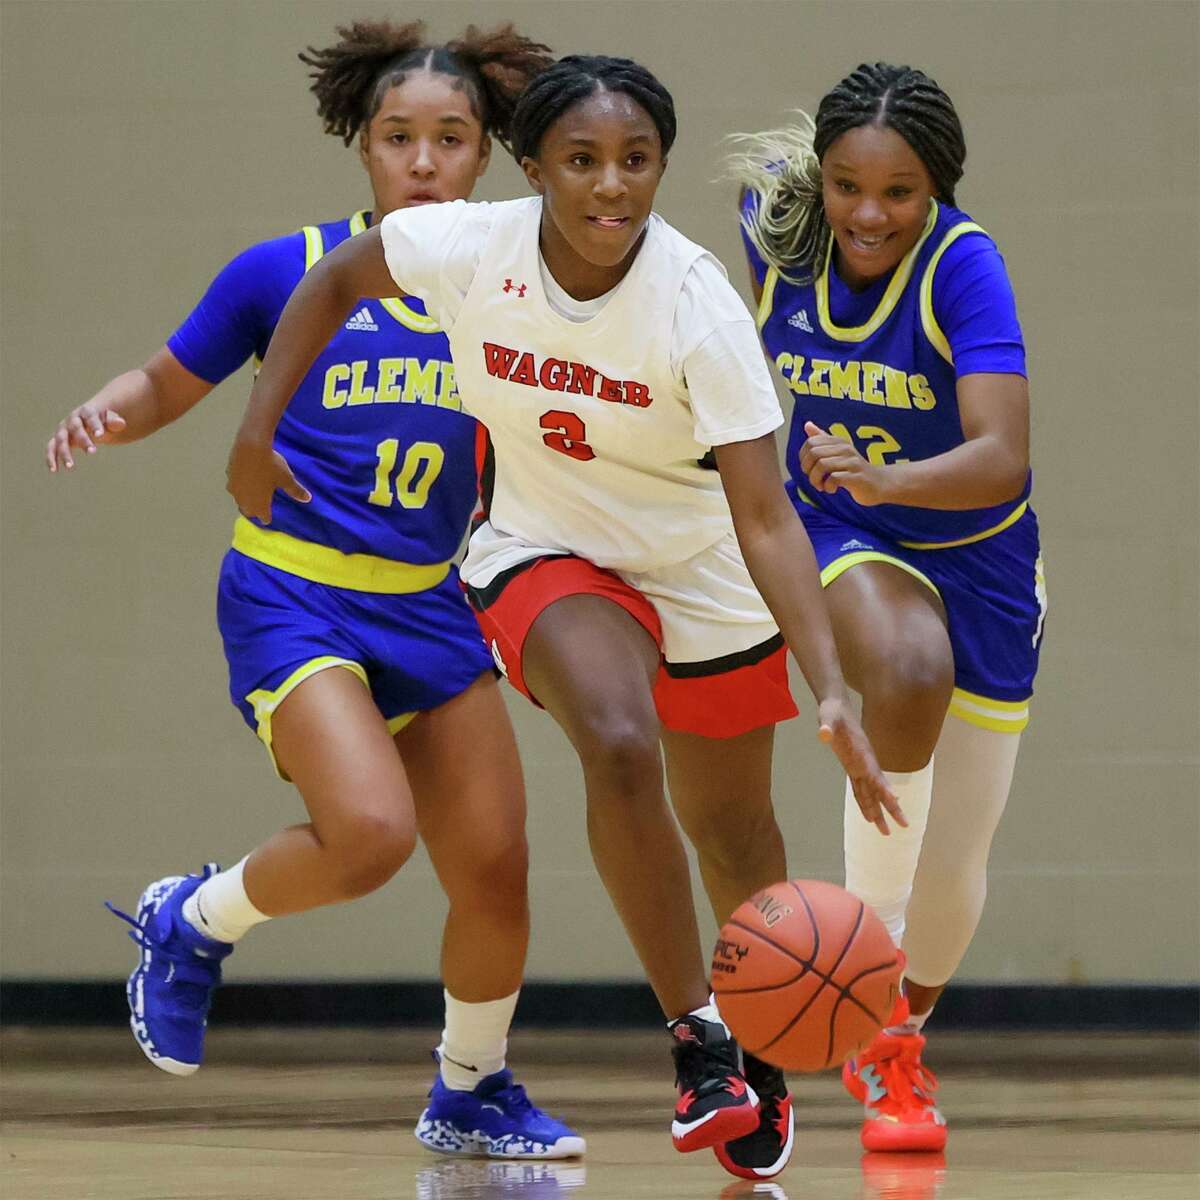 Wagner's La Sneed races past Clemens Deja Hinson, left, and Aysia Proctor during their District 27-6A girls basketball game at Wagner on Tuesday, Feb. 8, 2022. Wagner claimed the district title with a 78-45 victory over Clemens.